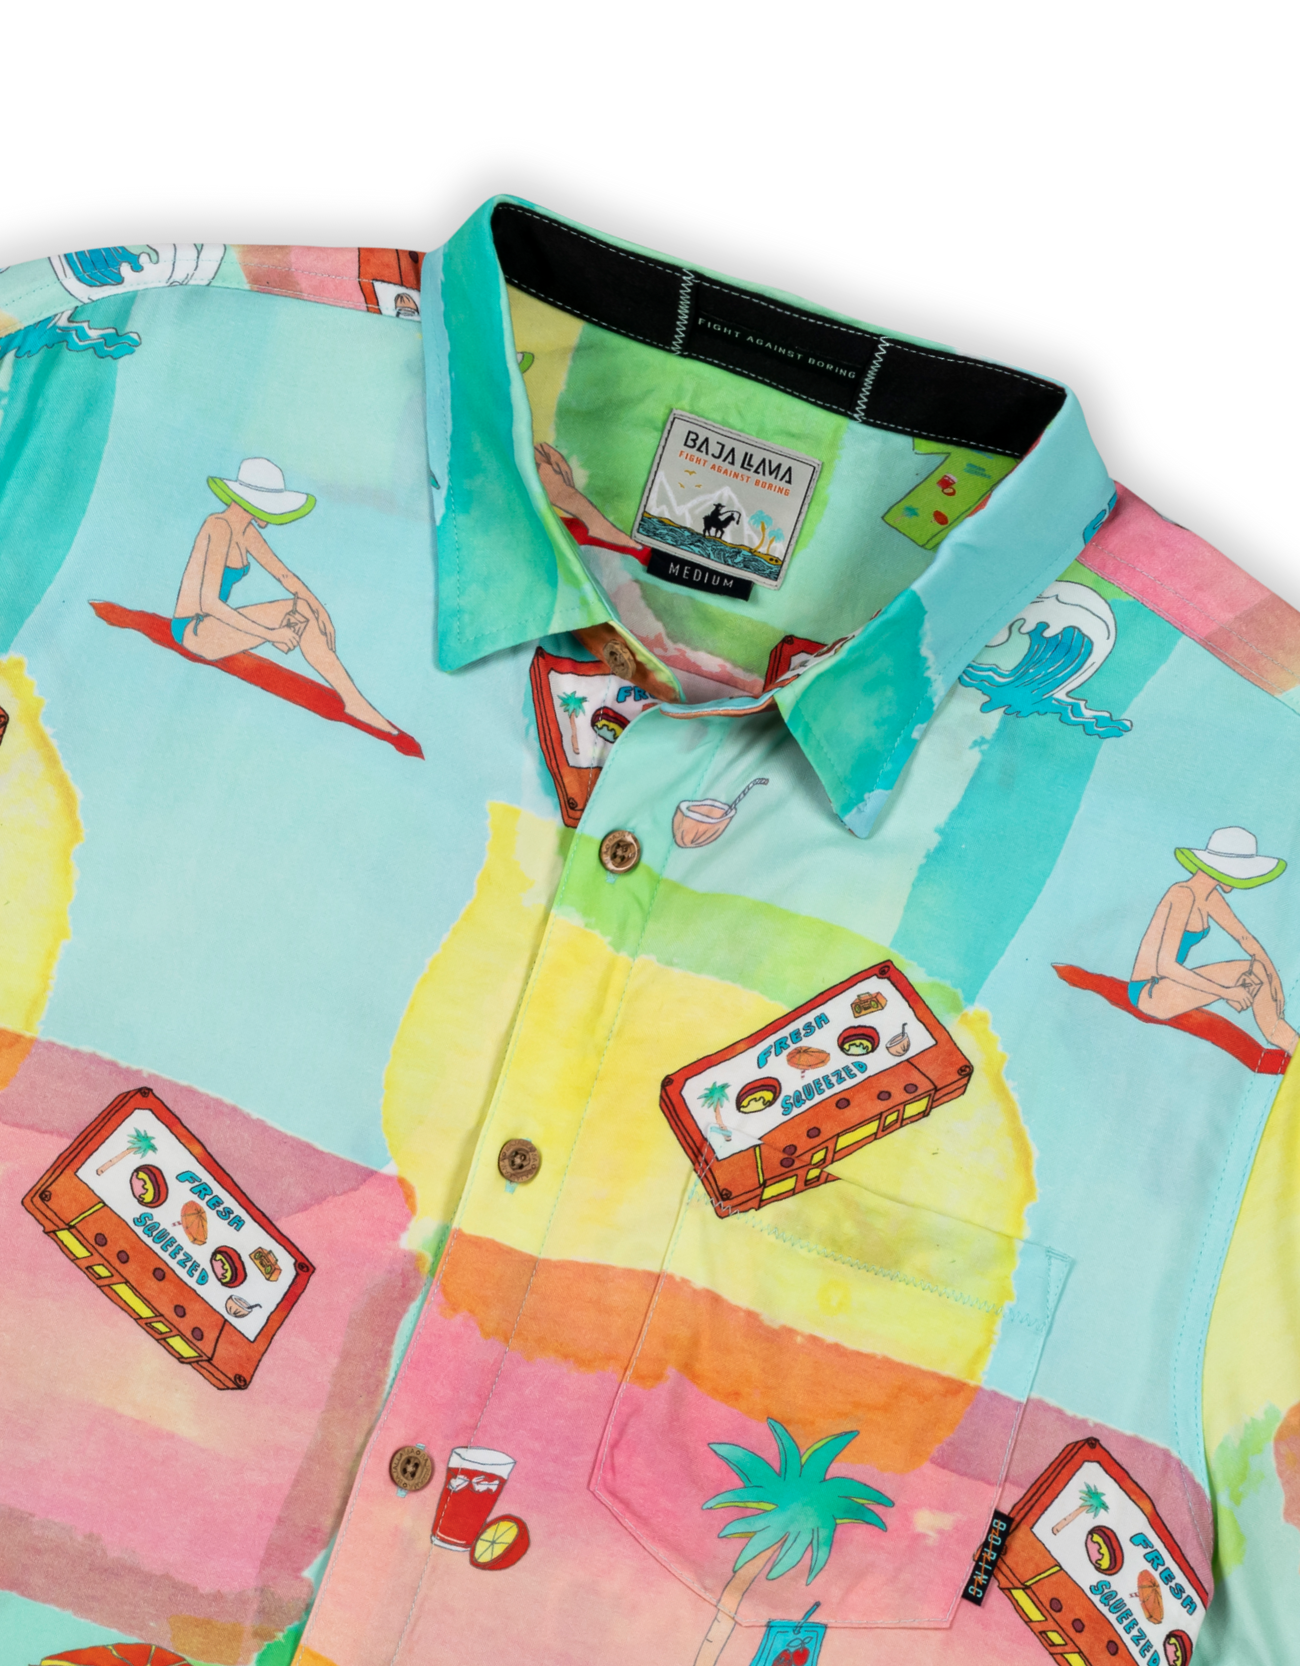 FRESH SQUEEZED - NIGHTHAWK™ BUTTON UP